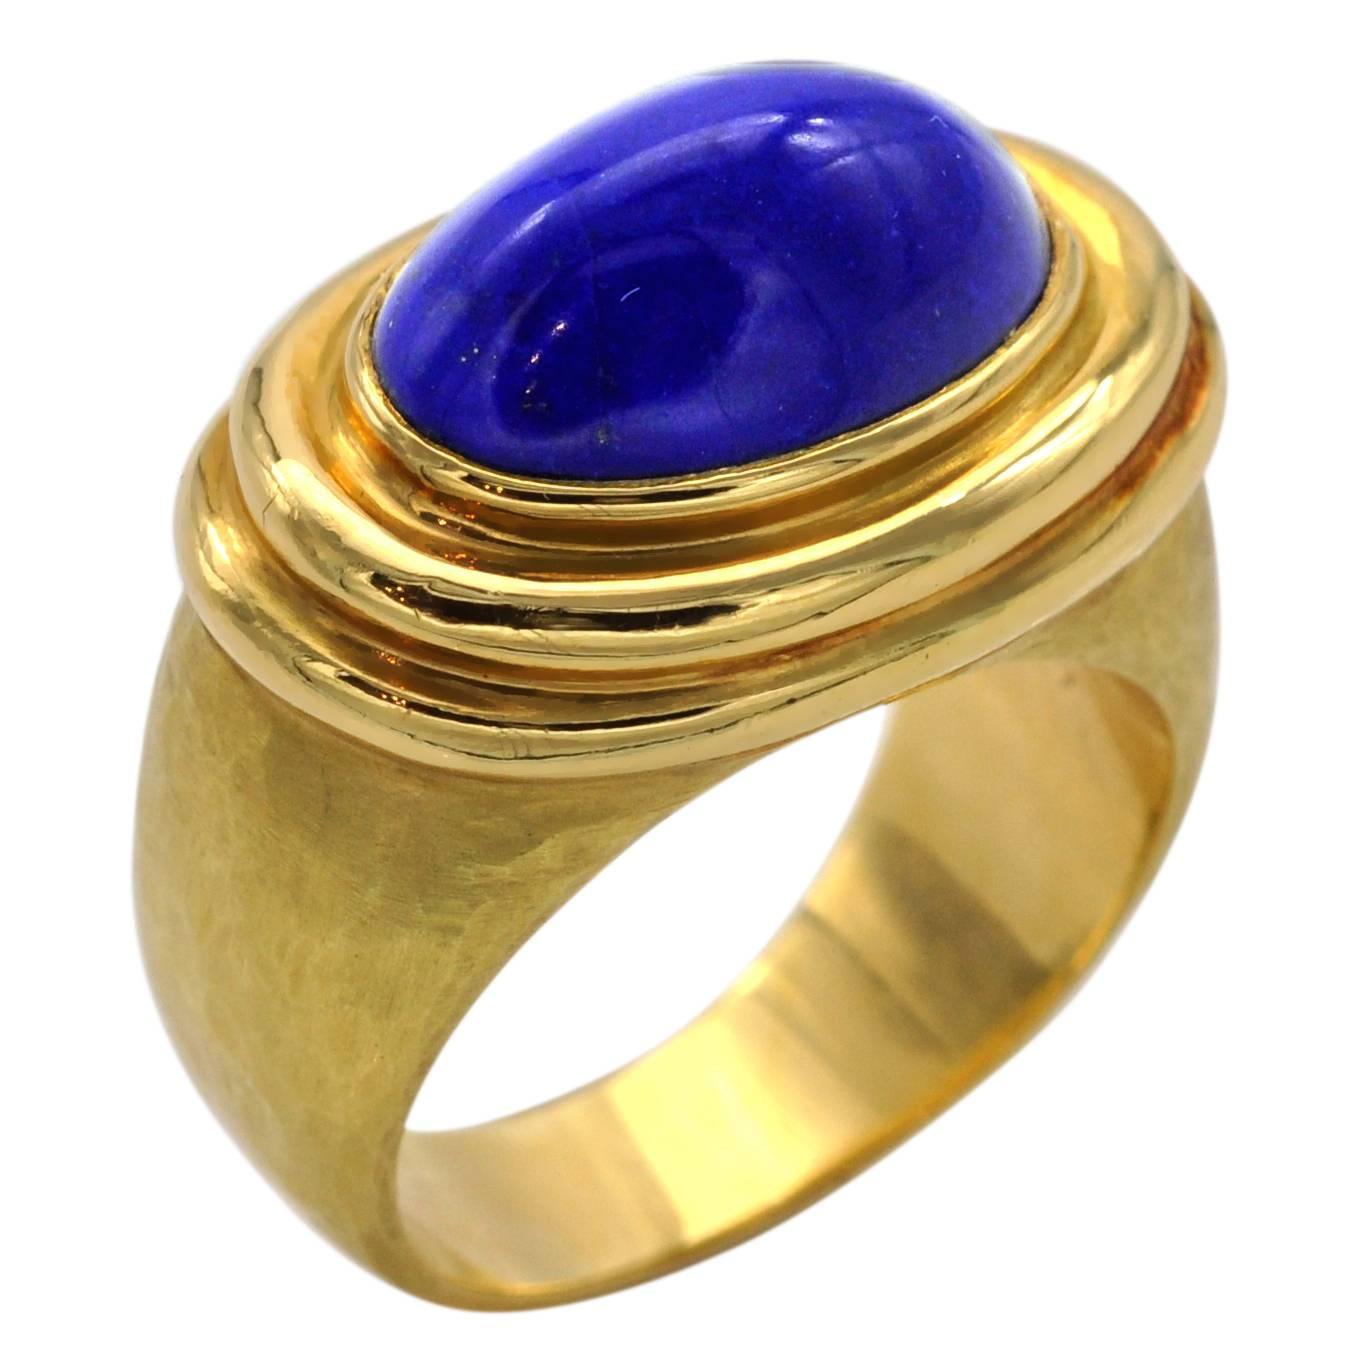 Hammered Gold and Lapis Lazuli Ring